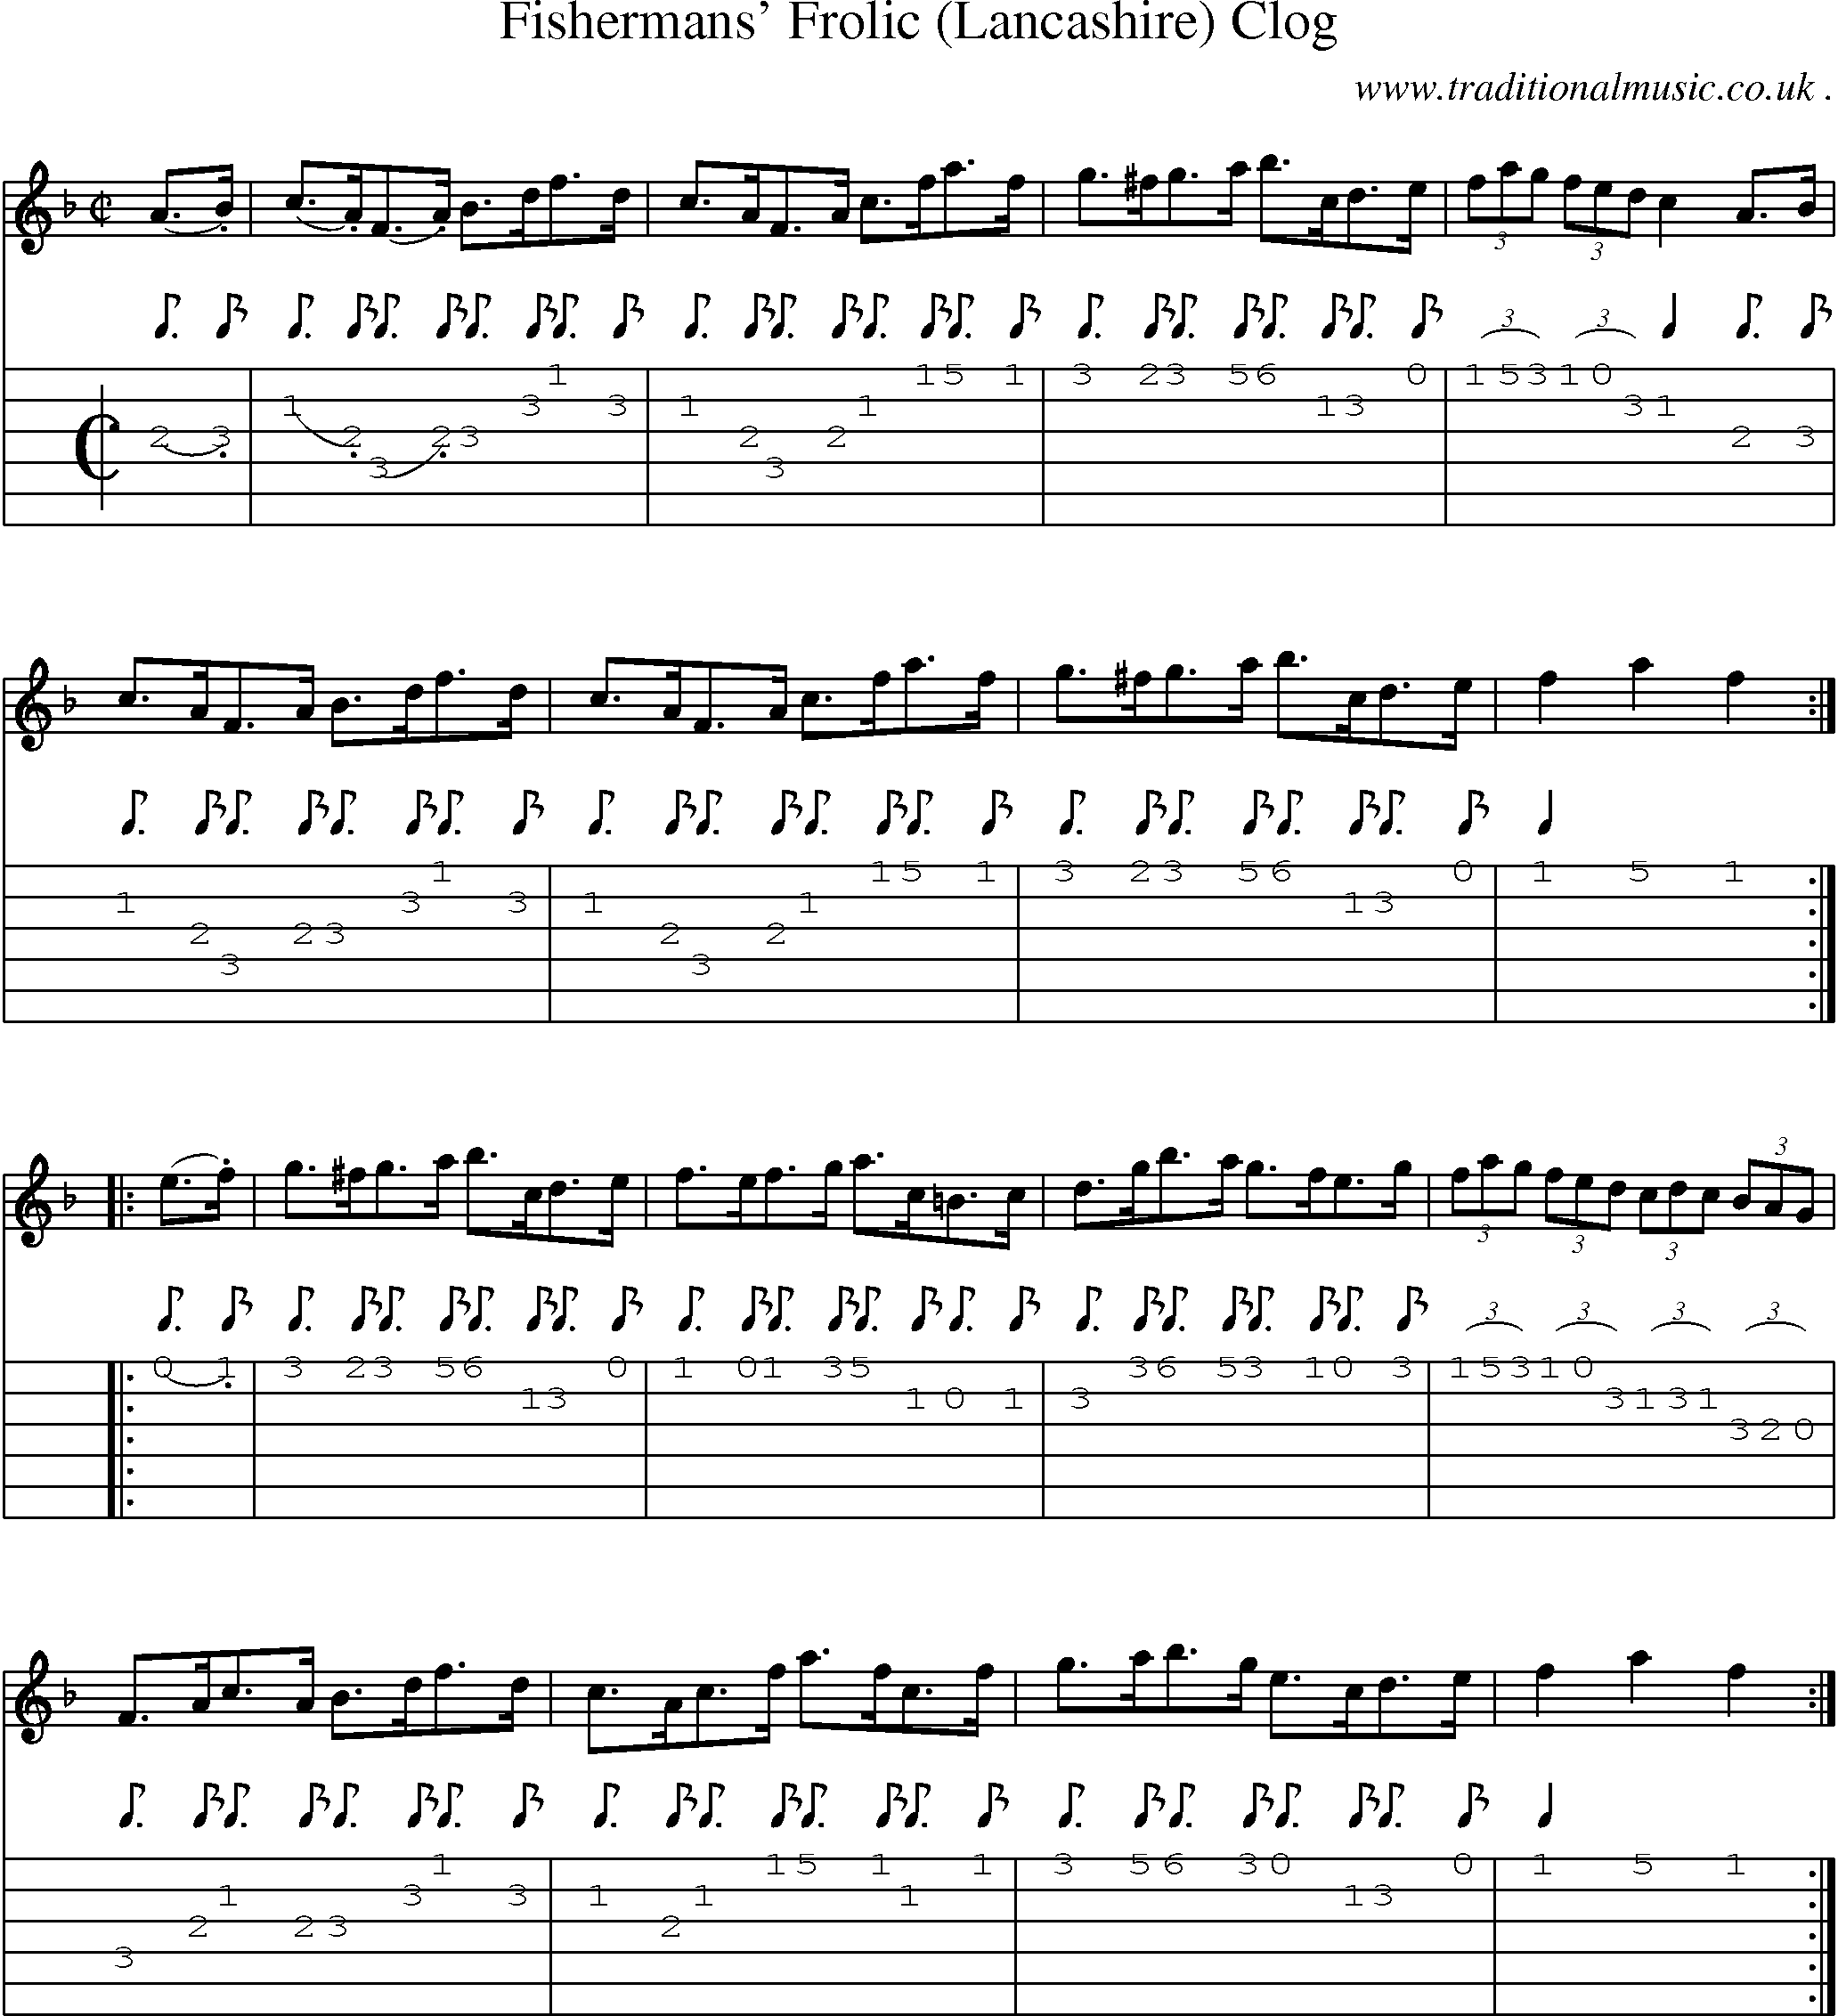 Sheet-Music and Guitar Tabs for Fishermans Frolic (lancashire) Clog